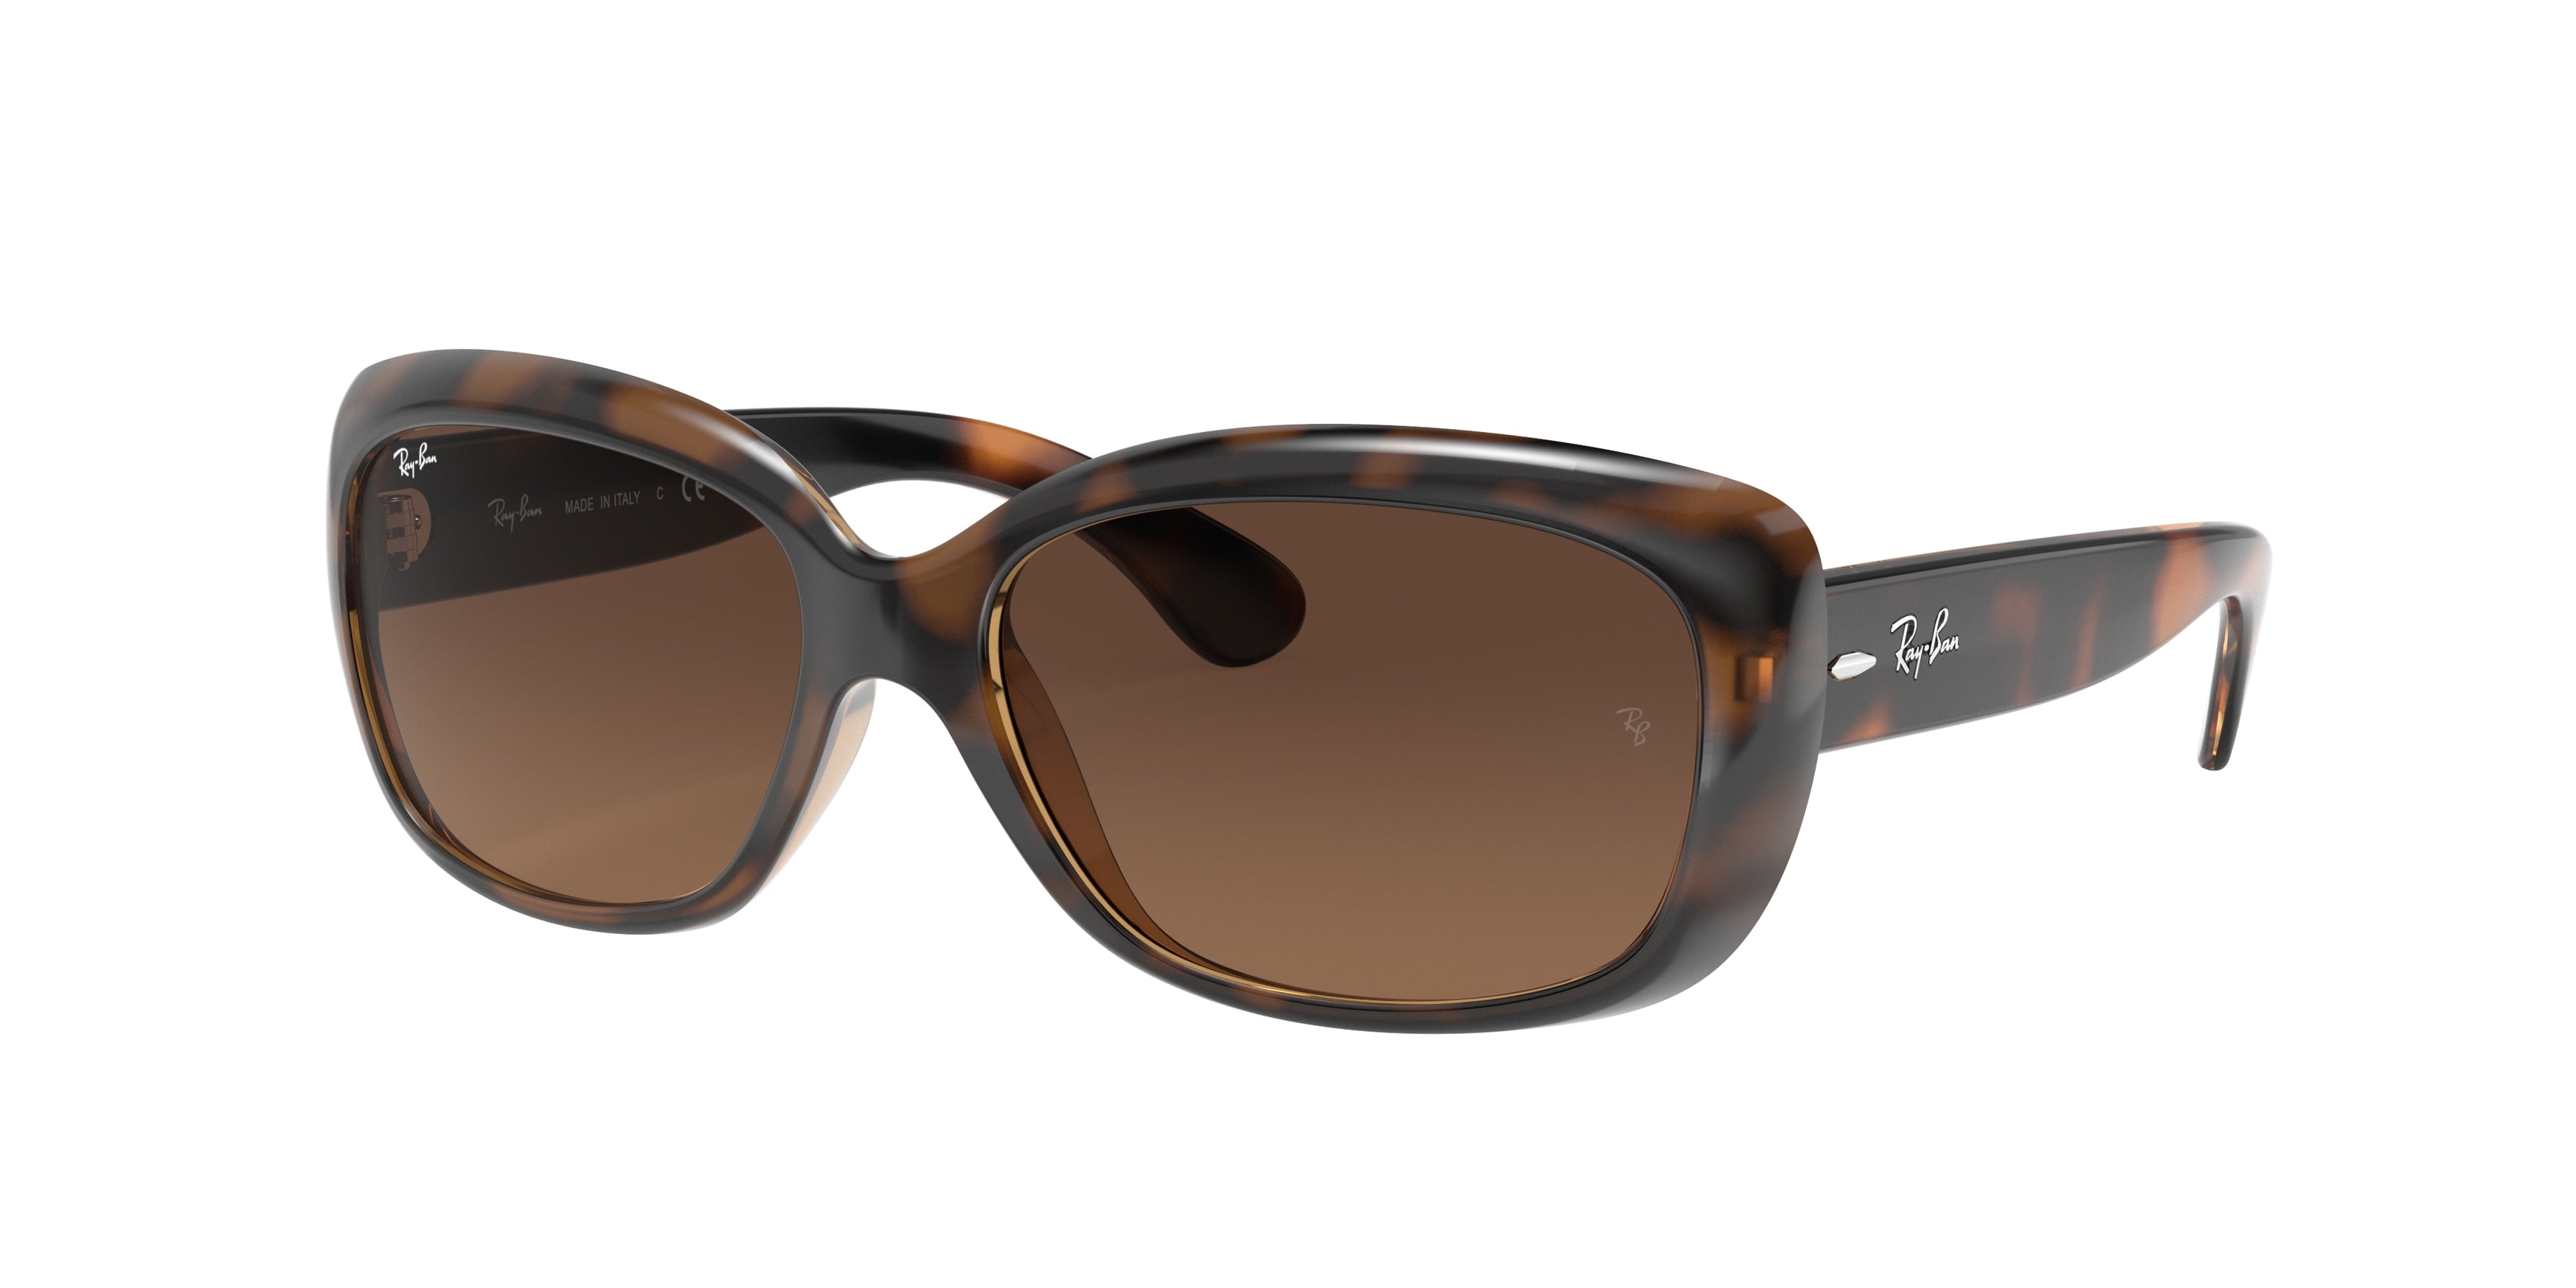 Ray-Ban JACKIE OHH RB4101 Butterfly Sunglasses  642/43-Havana 57-135-17 - Color Map Tortoise